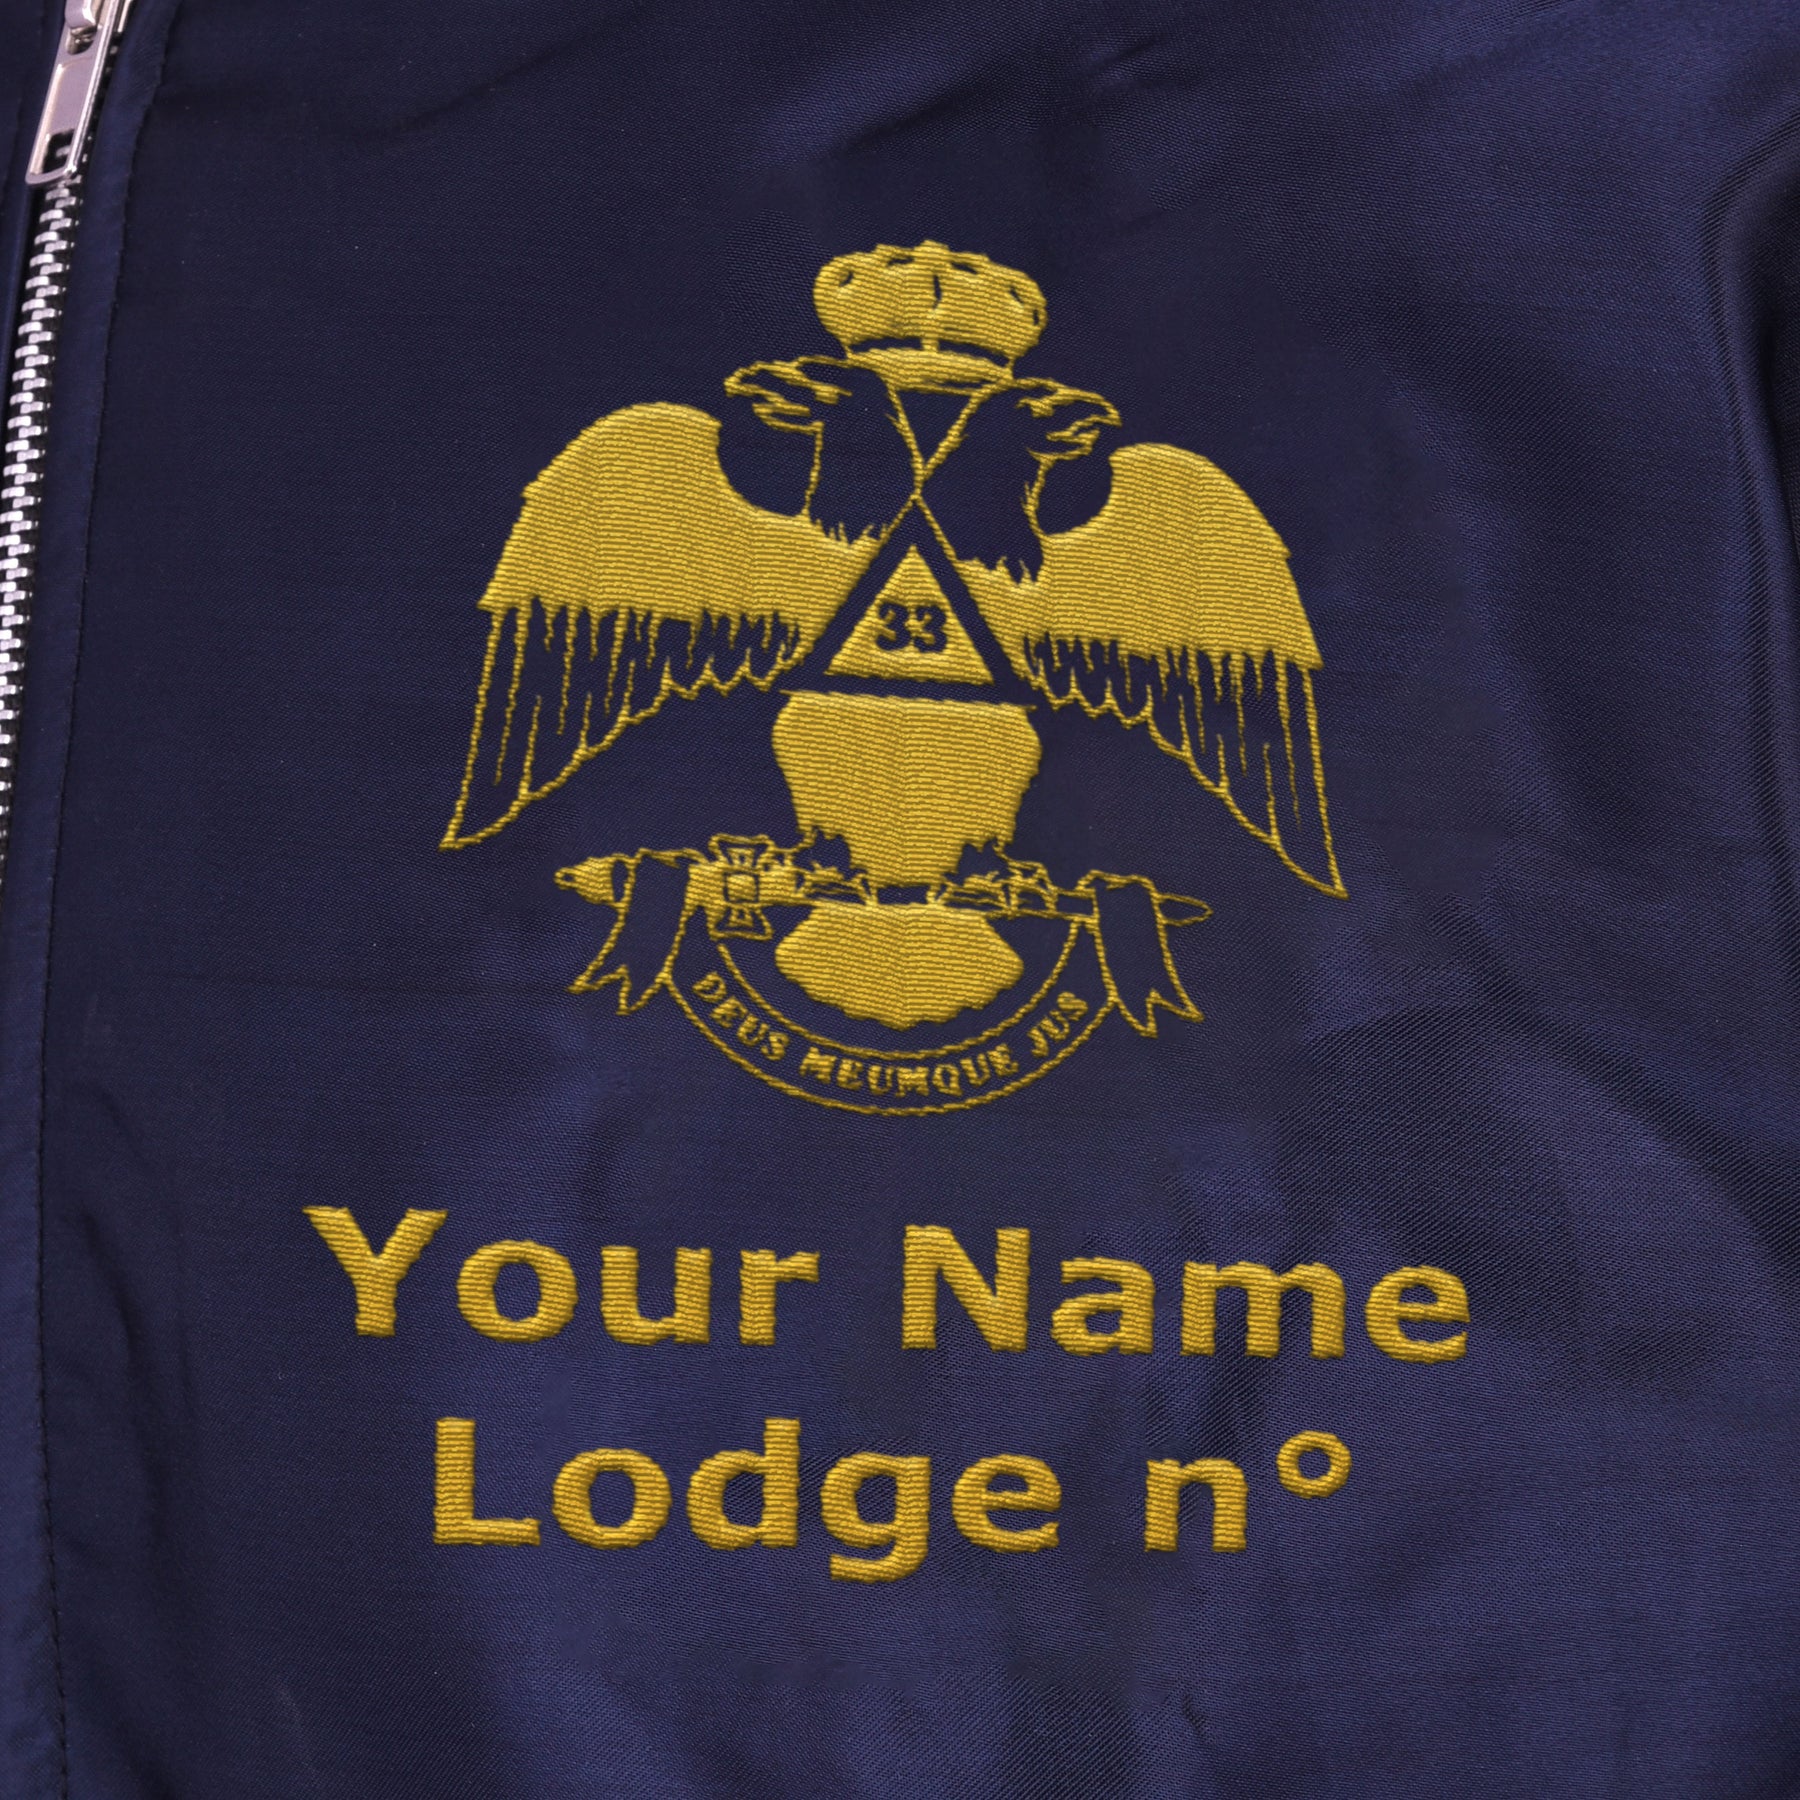 33rd Degree Scottish Rite Jacket - Wings Down Blue Color With Gold Embroidery - Bricks Masons